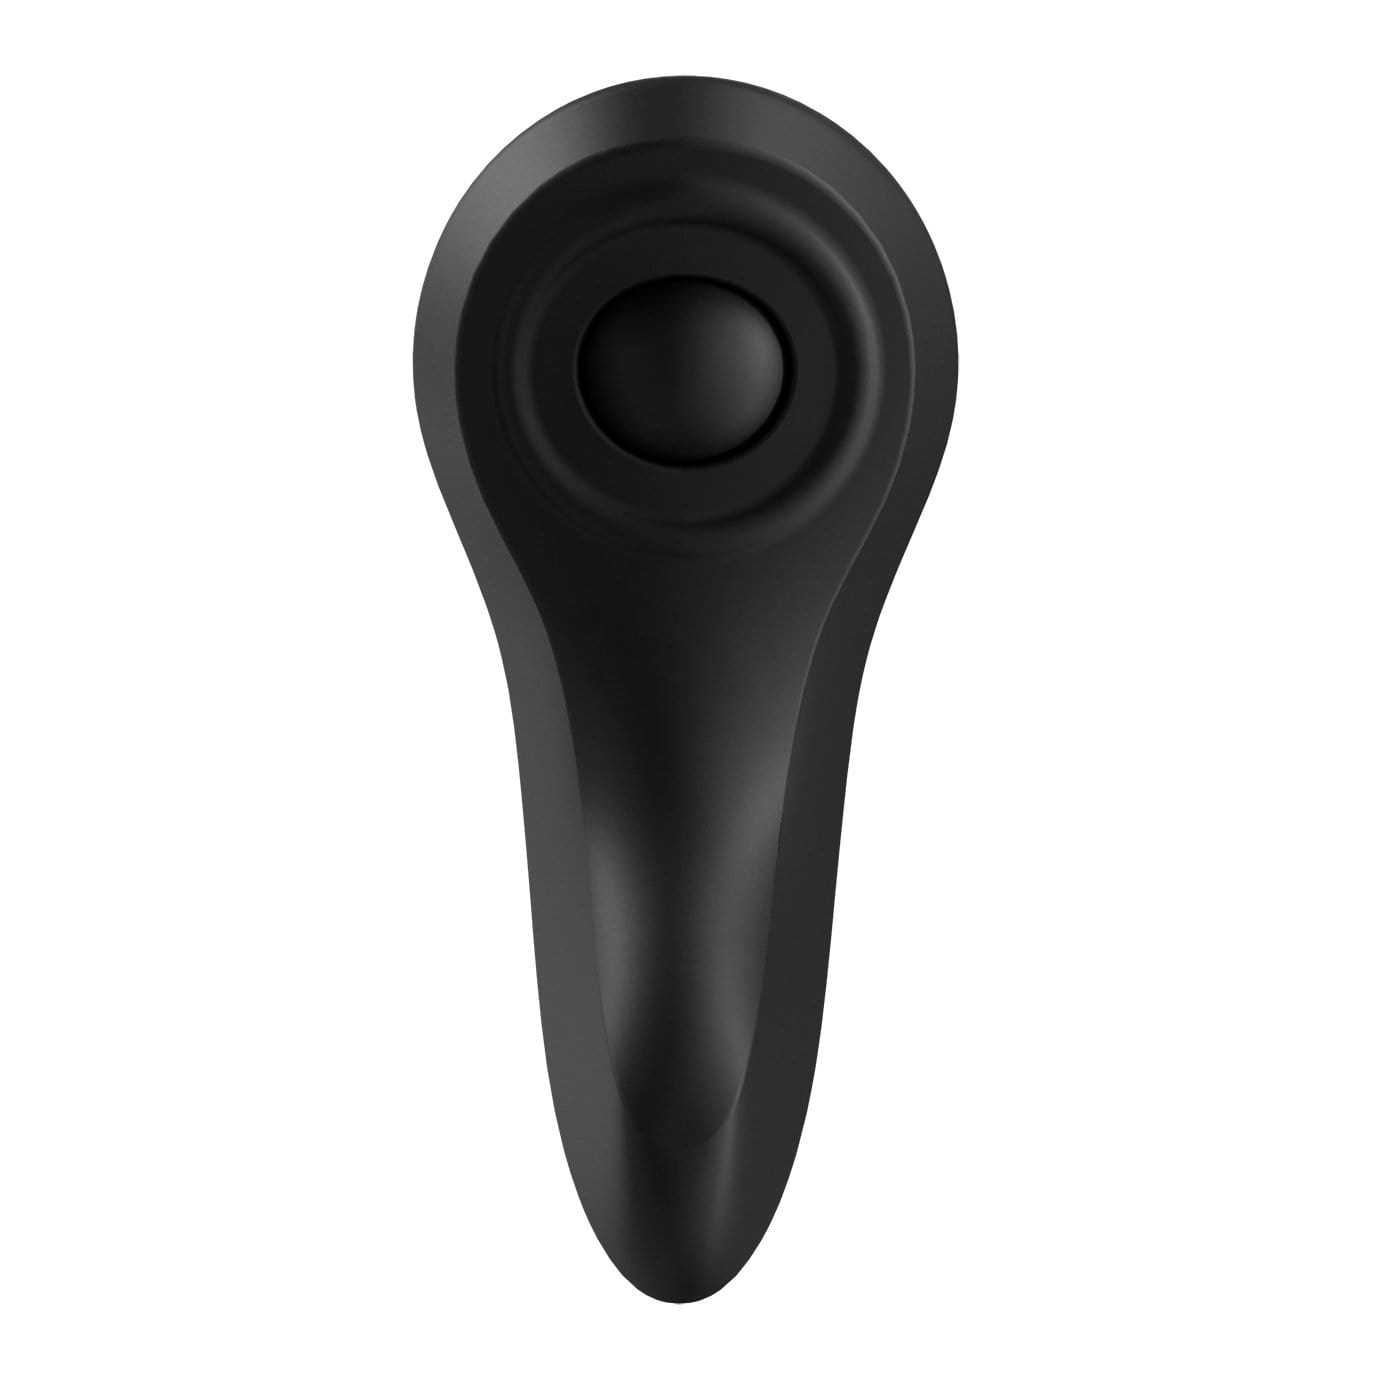 Satisfyer - Little Secret App-Controlled Panty Vibrator with Remote Control (Black) Remote Control Couple's Massager (Vibration) Rechargeable 4061504003344 CherryAffairs